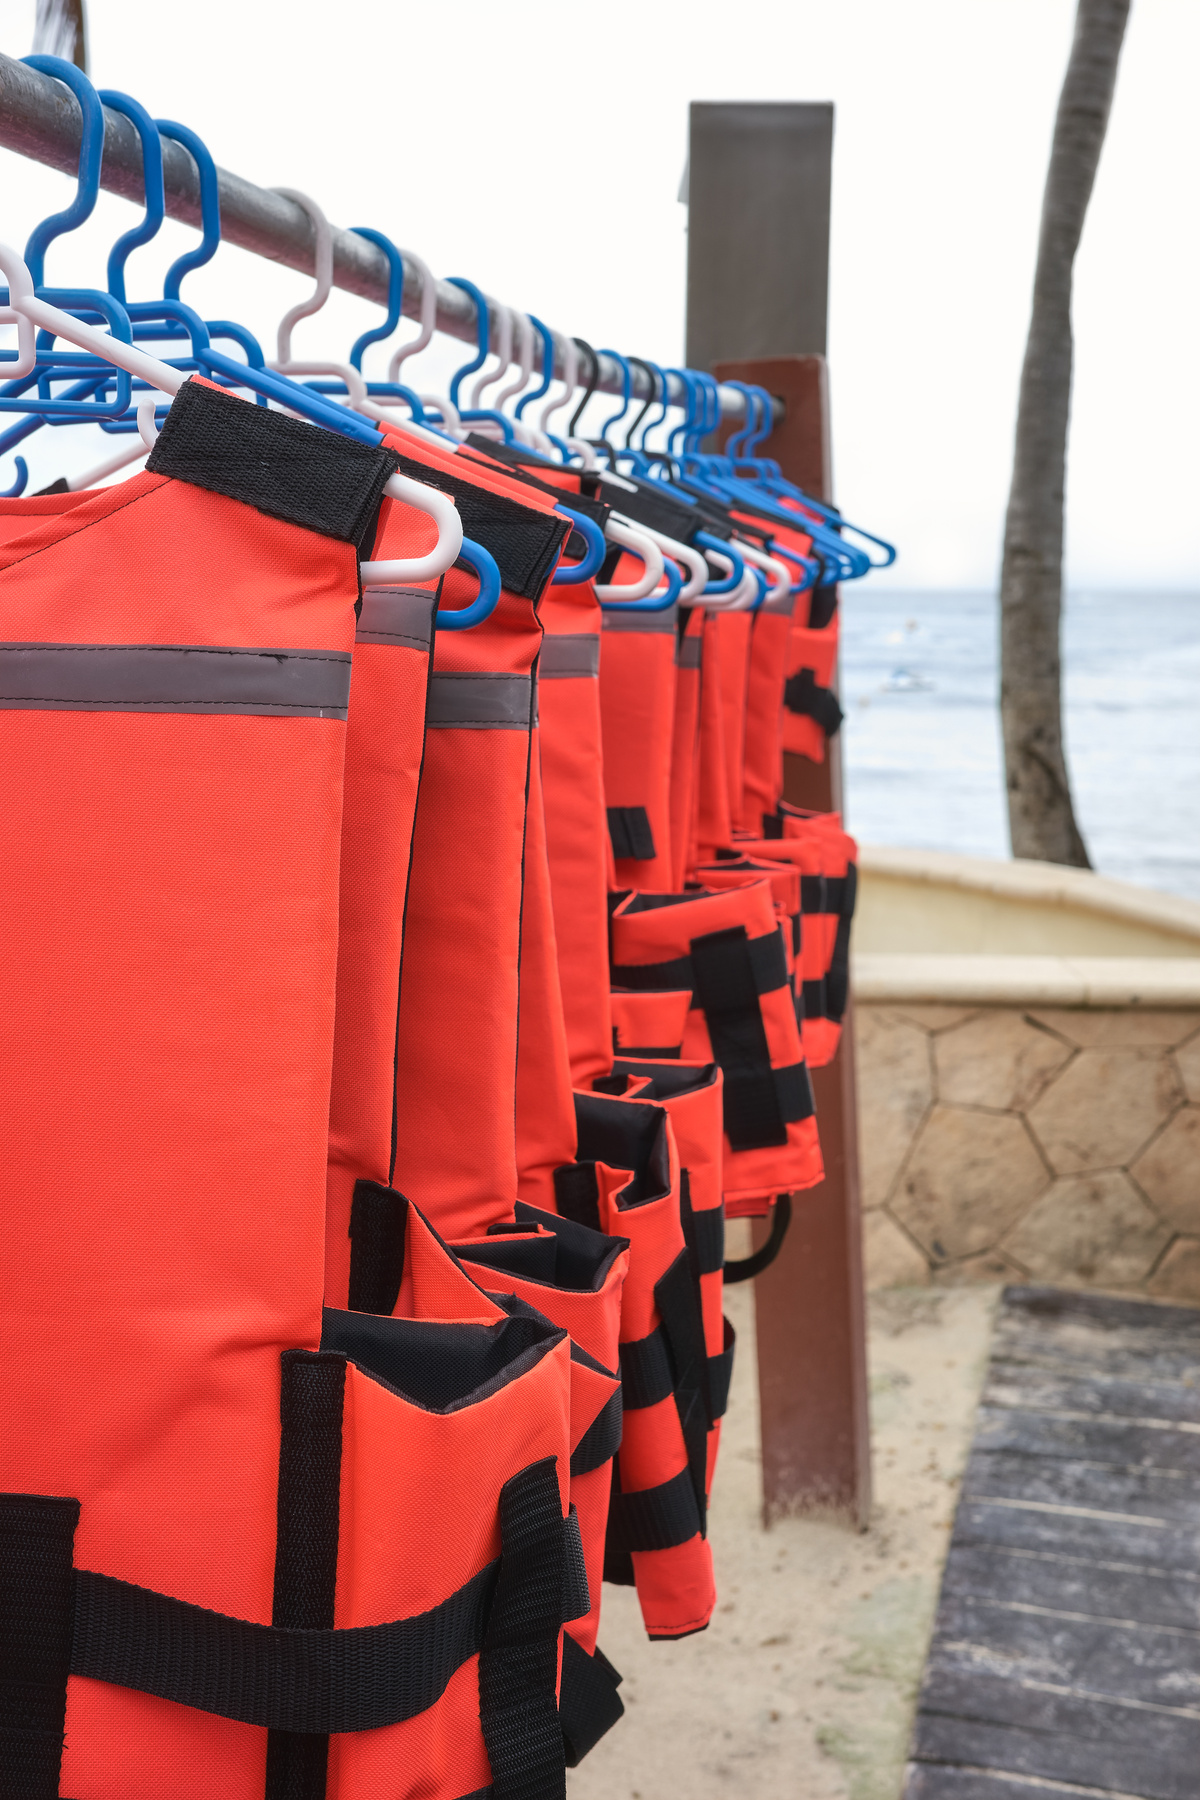 Life jackets dry on hangers at a beach, selective focus.